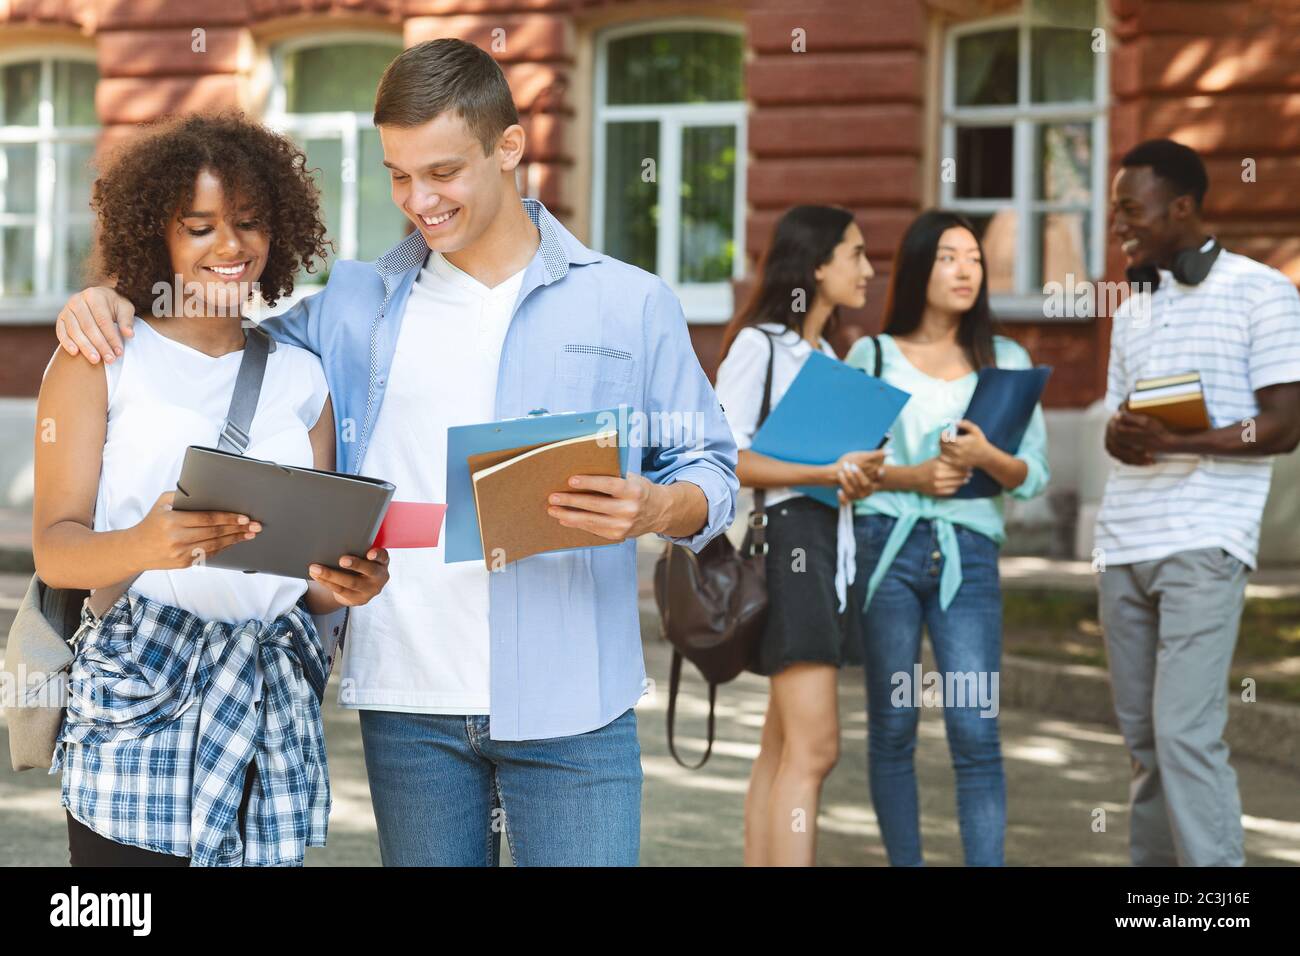 Cheerful student embracing his female classmate outdoors, greeting with exam pass Stock Photo